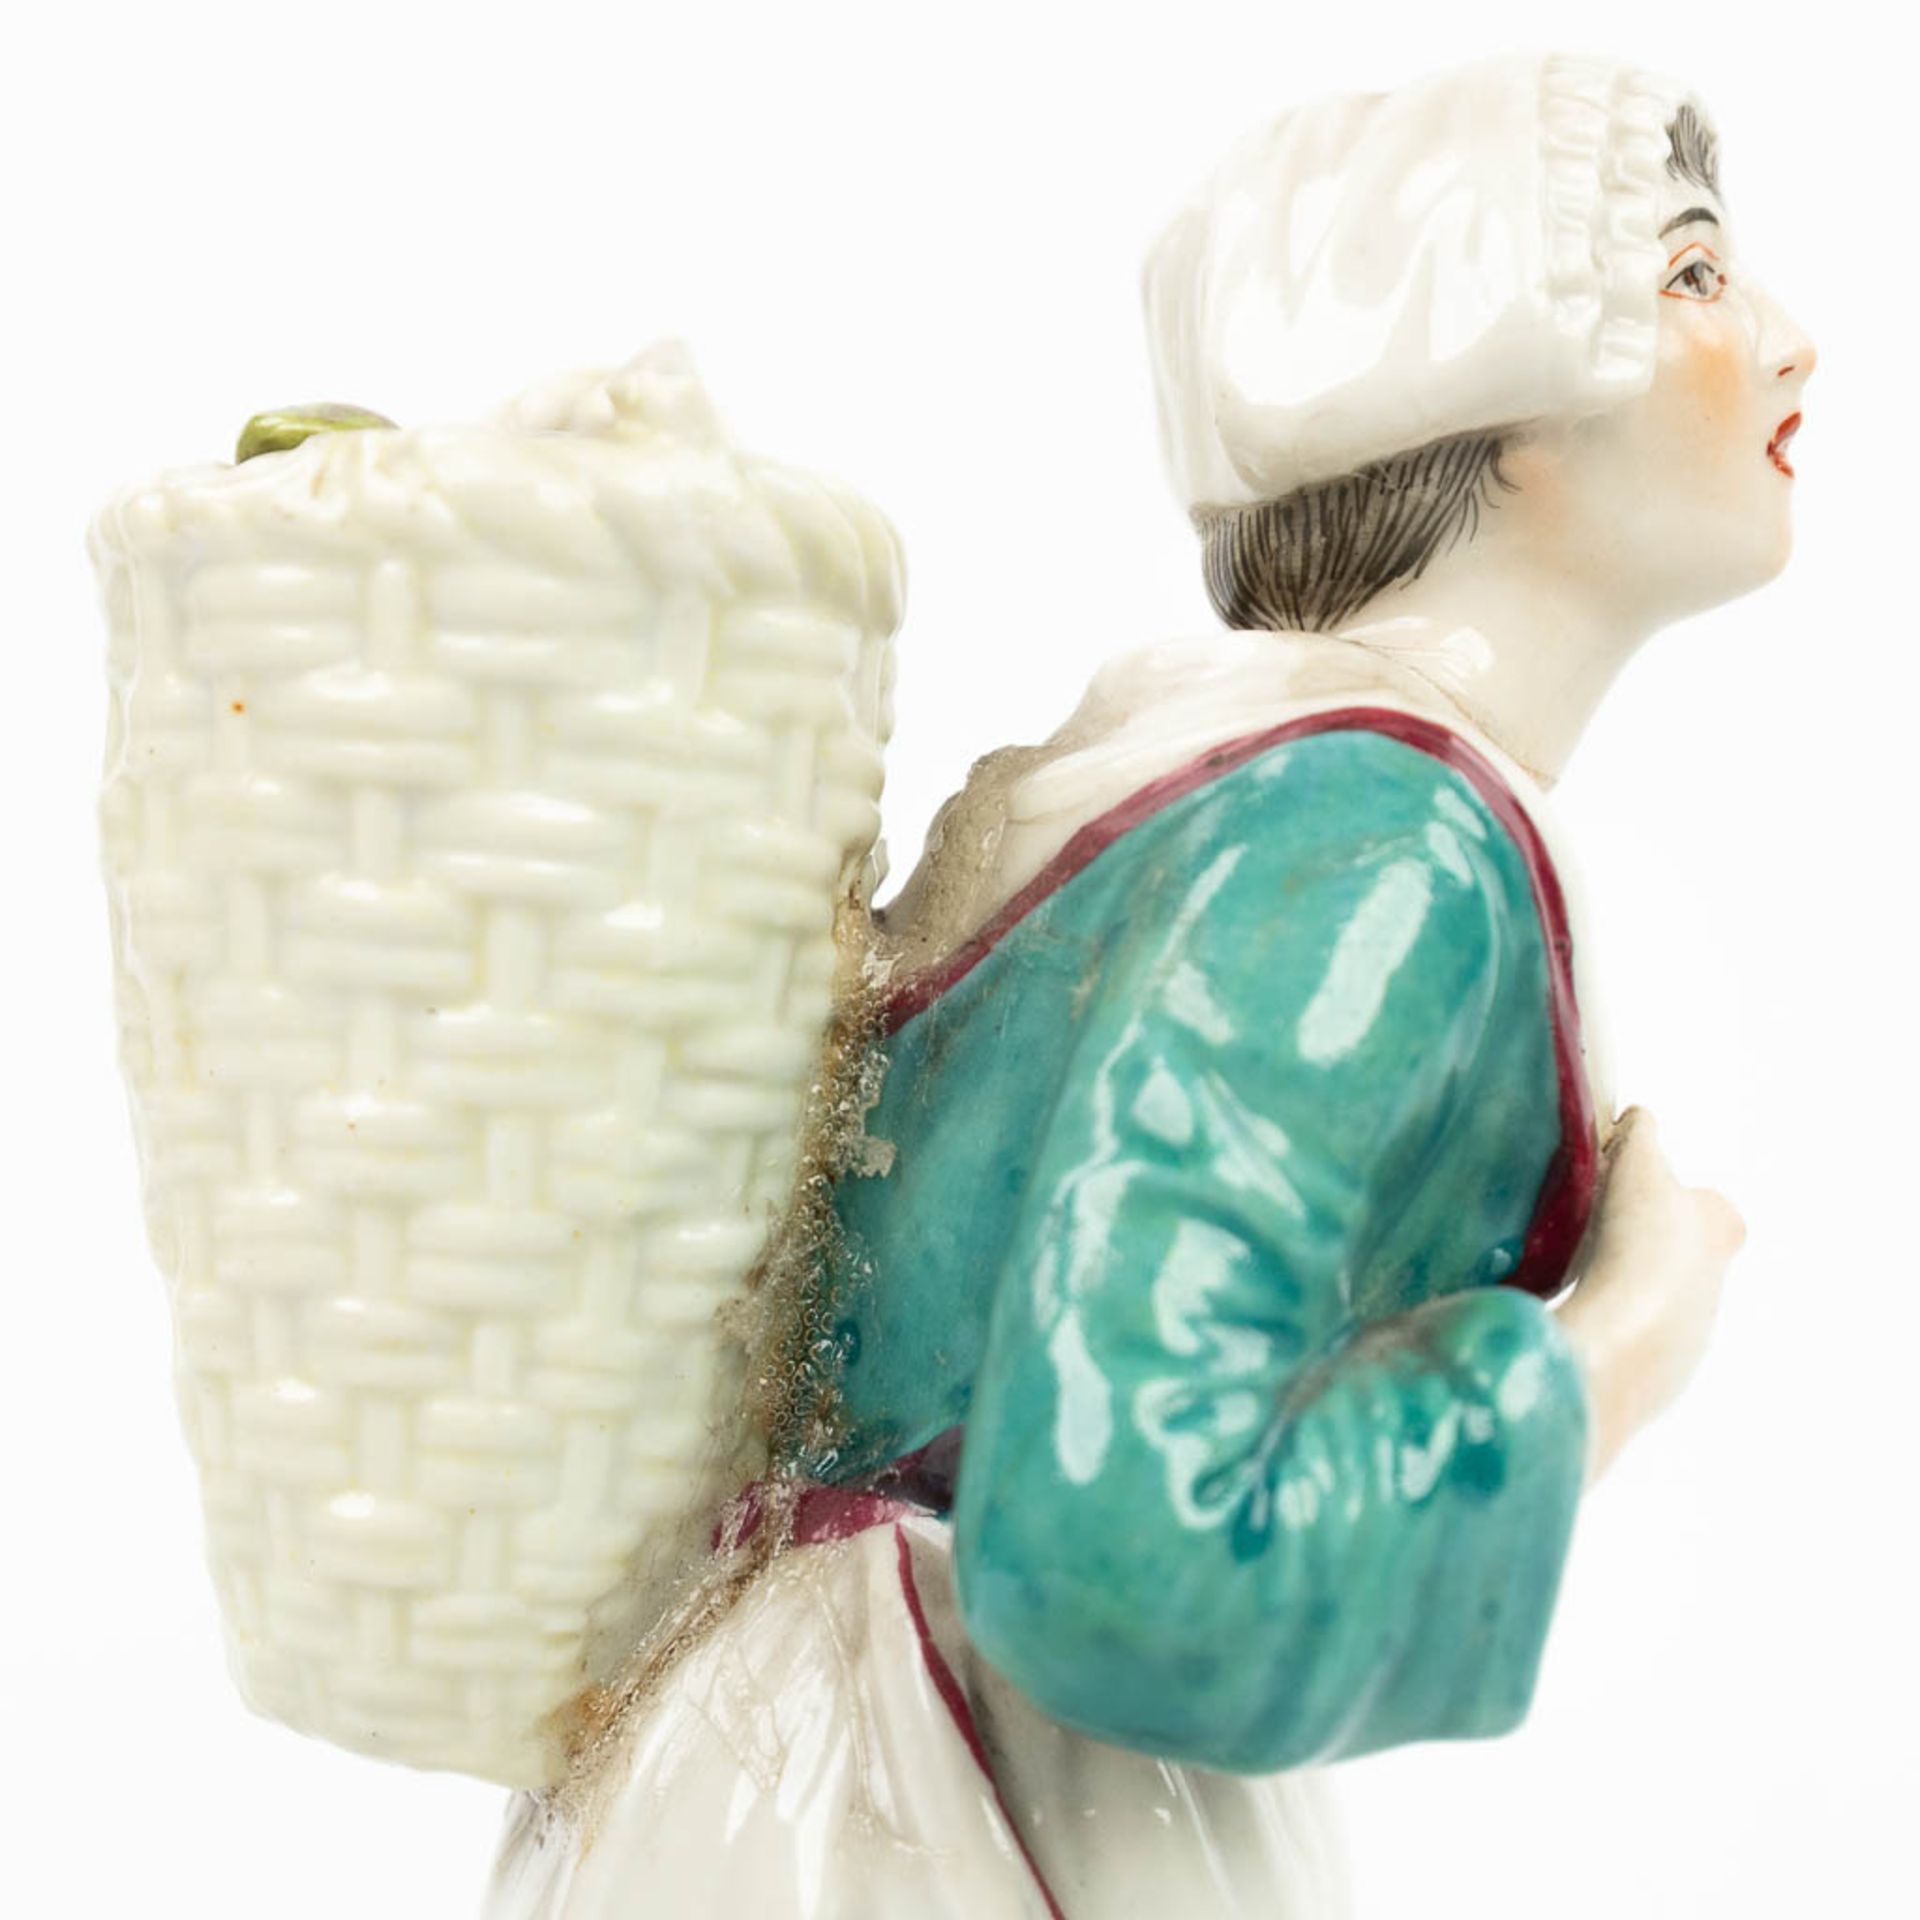 A pair of statues made of porcelain made in Germany and marked Ludwigsburg. (H:18cm) - Image 14 of 16